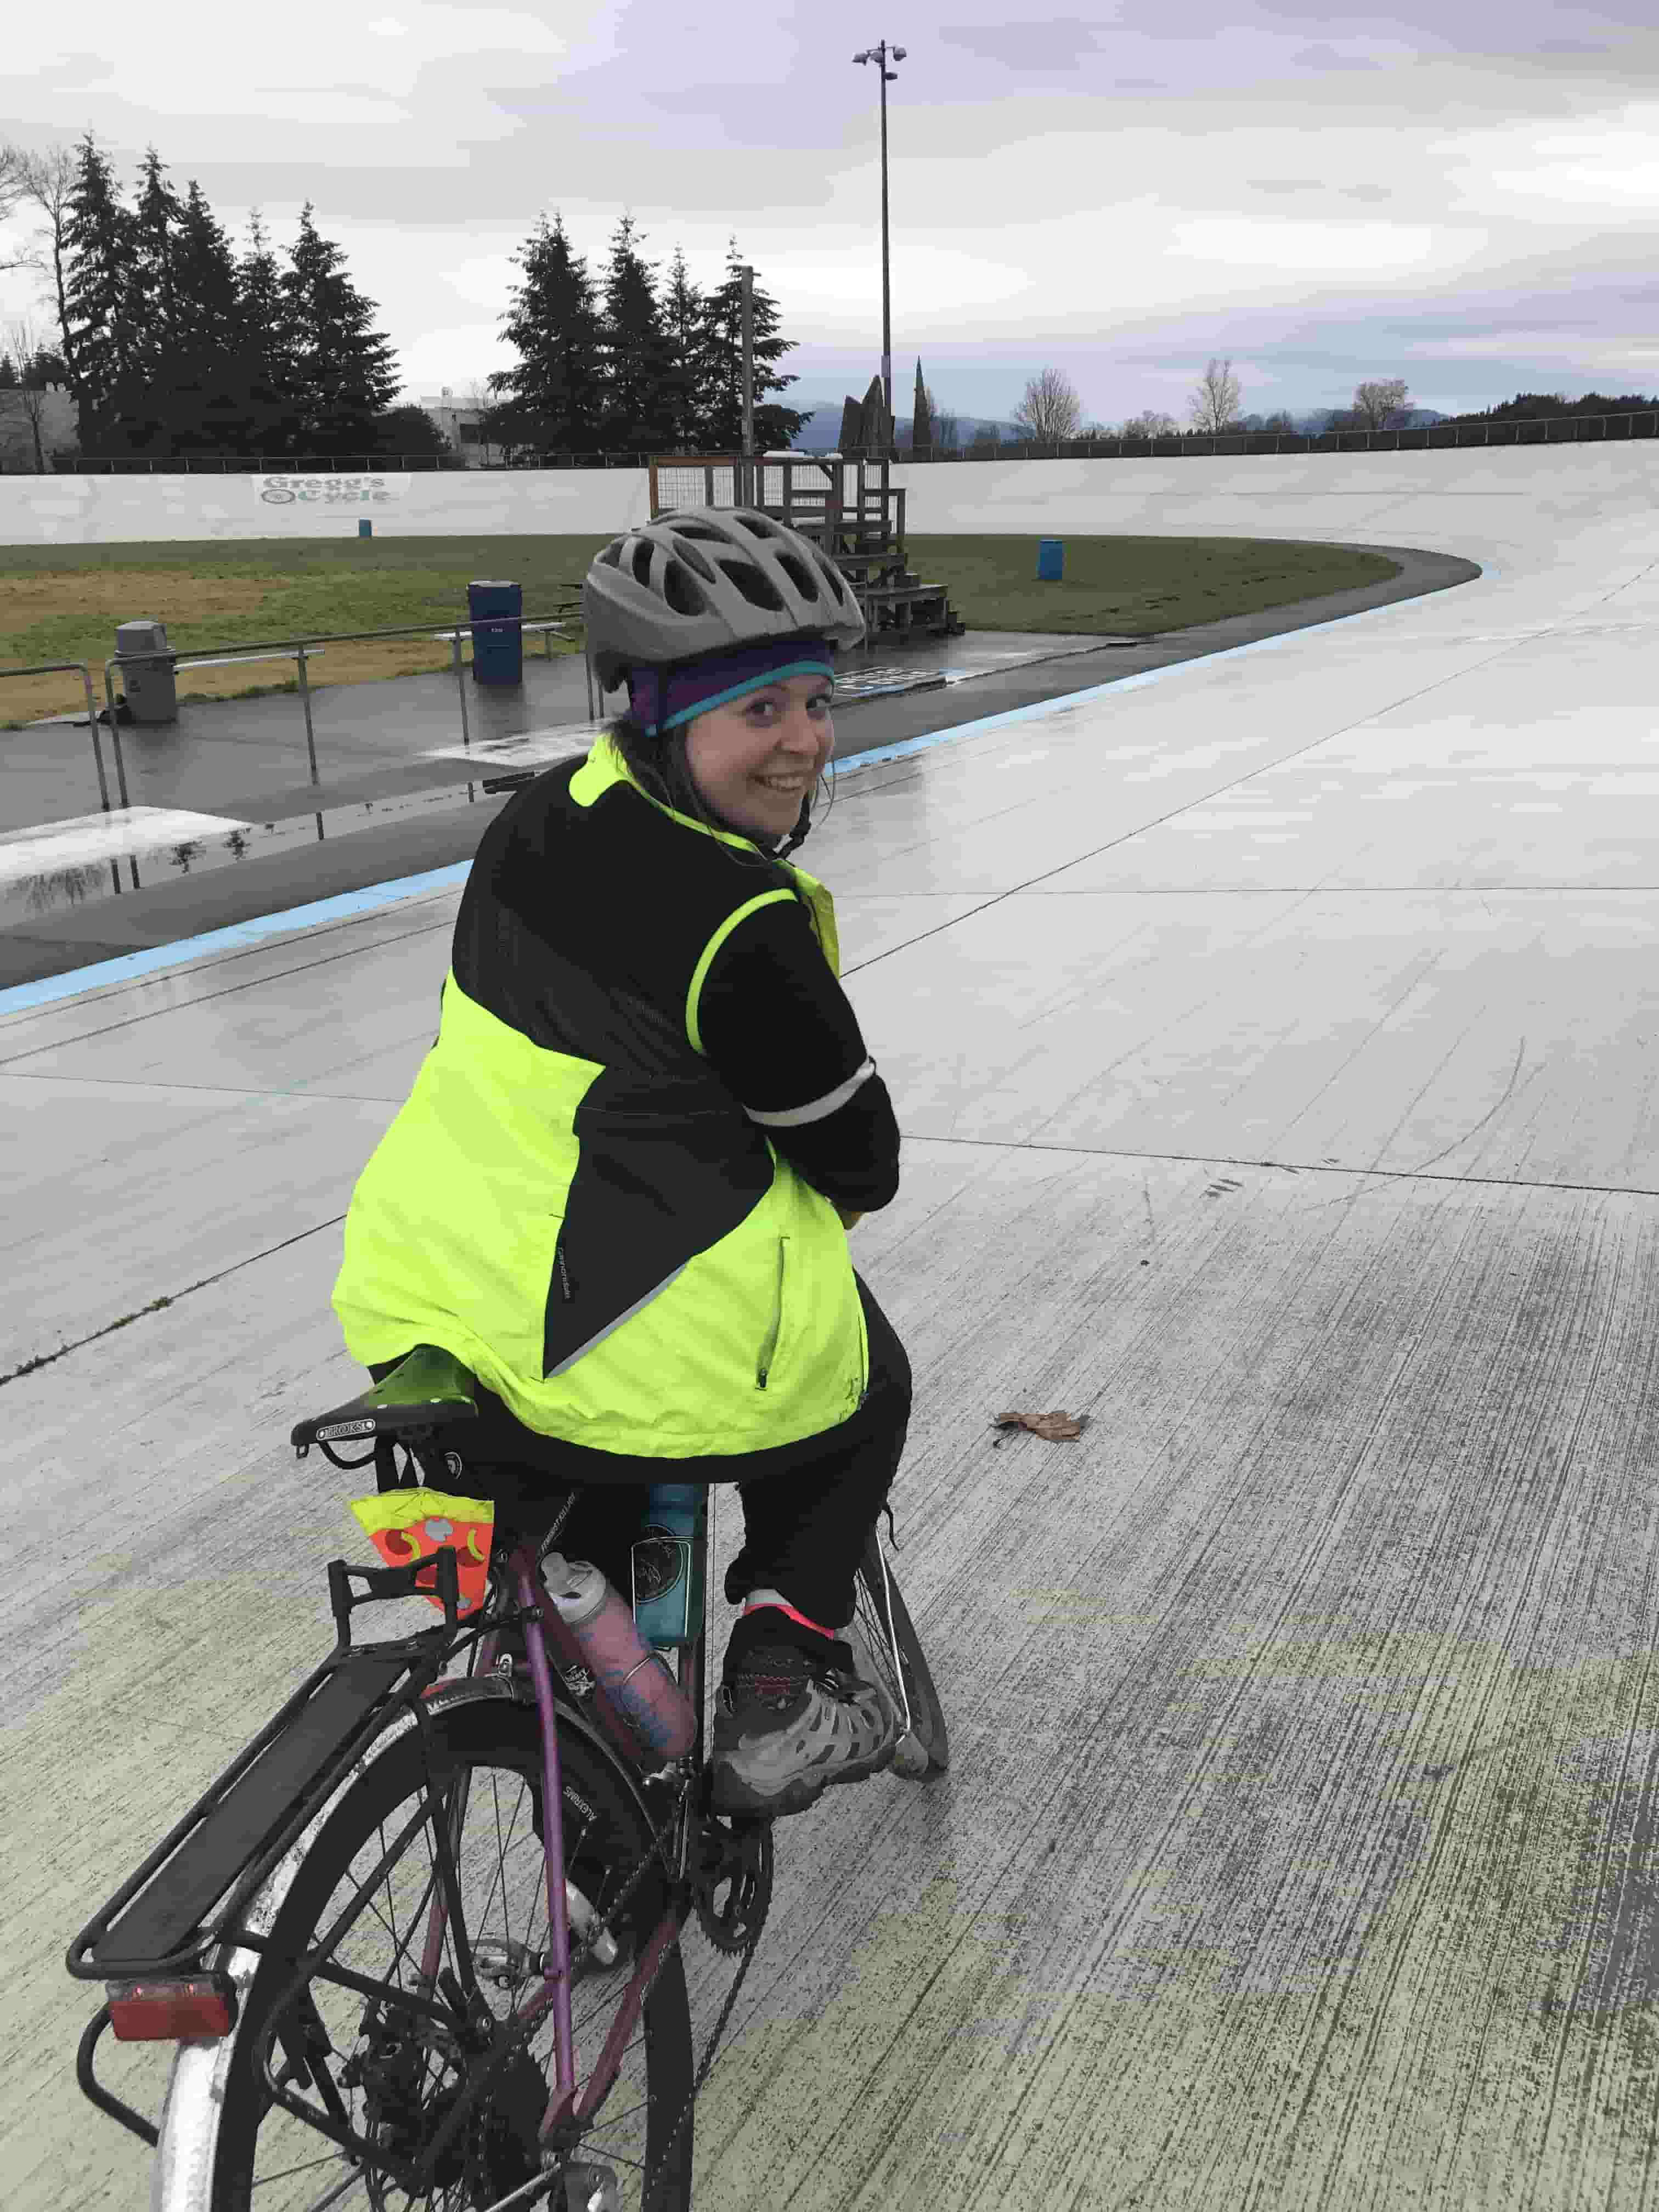 Cyclist looking back while seated on a bike in the middle of a race track wearing biking gear on a rainy day